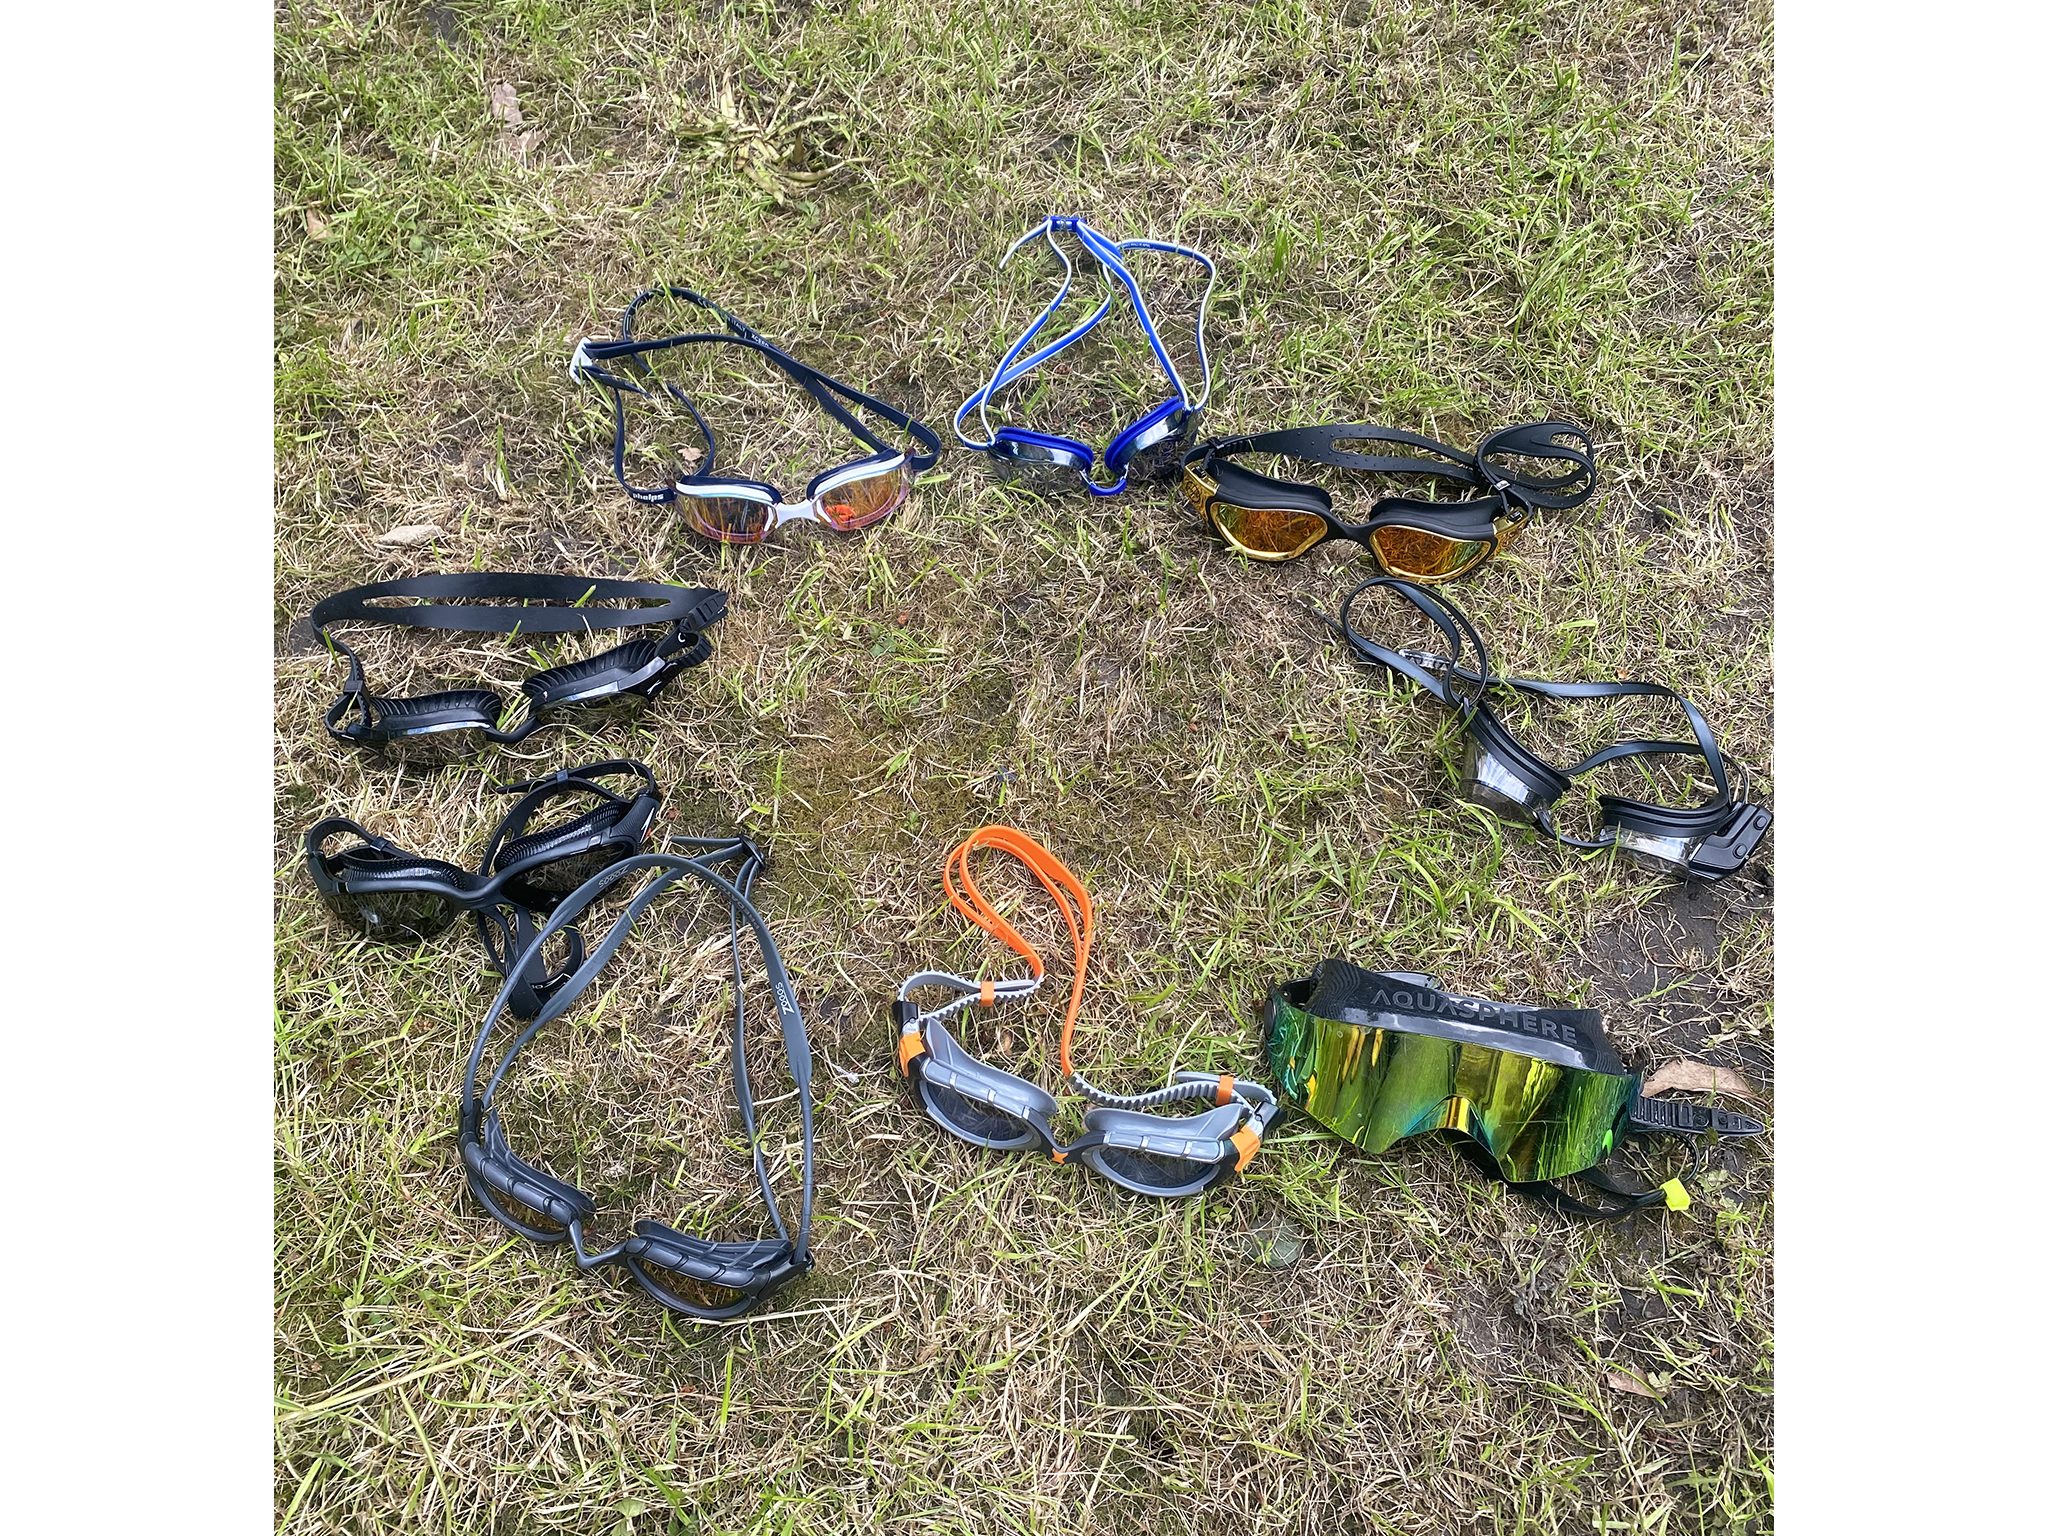 A selection of the best swimming goggles that we tested for this review